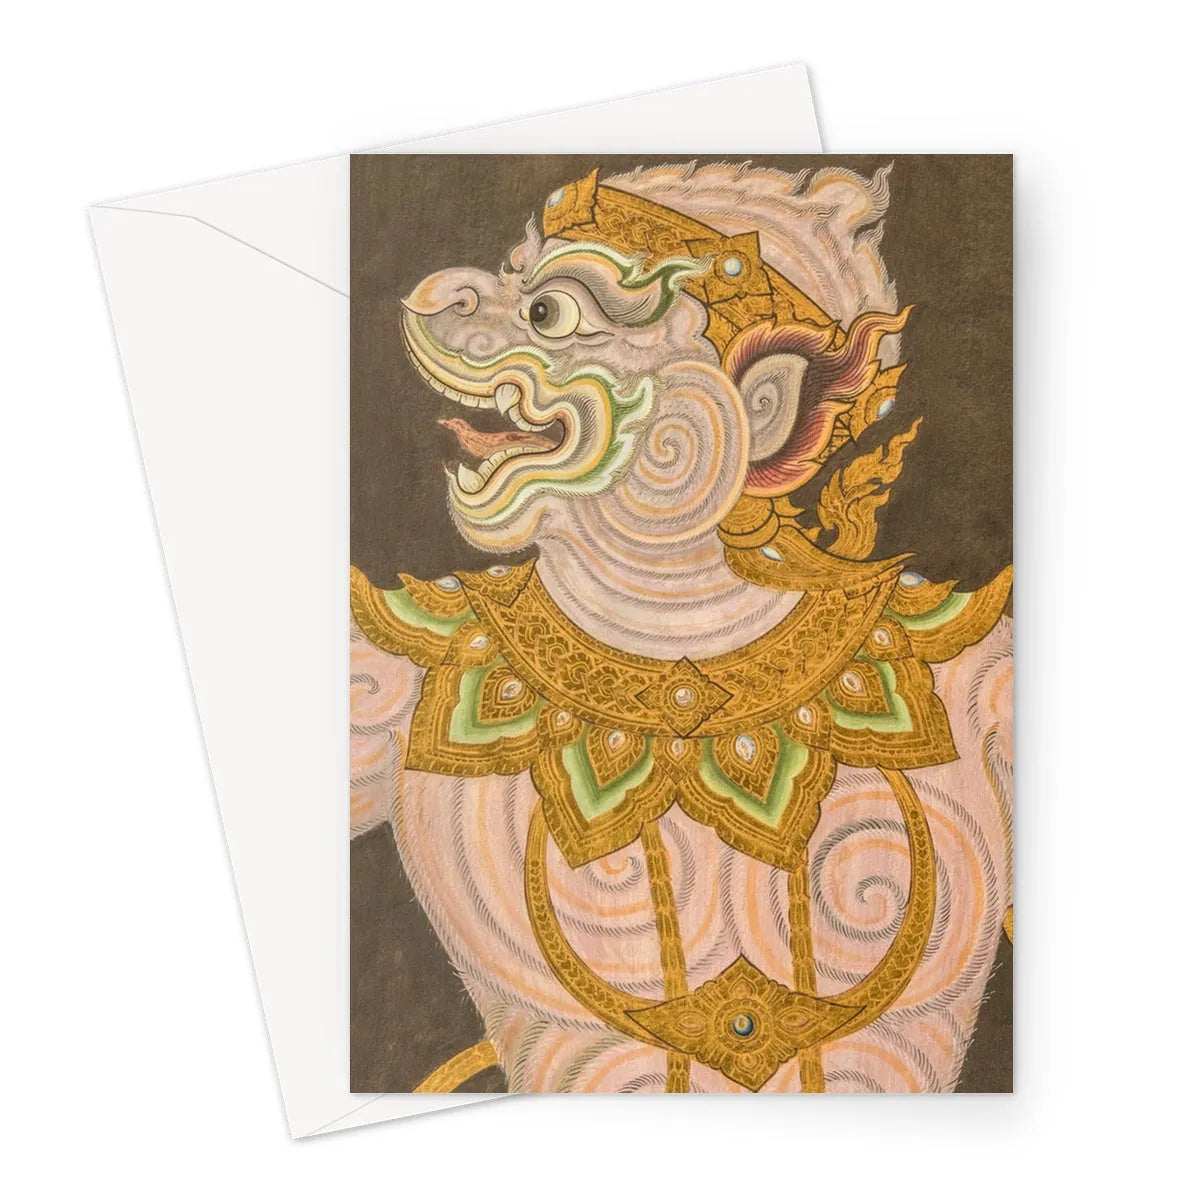 Monkey Do Greeting Card - A5 Portrait / 1 Card - Greeting & Note Cards - Aesthetic Art